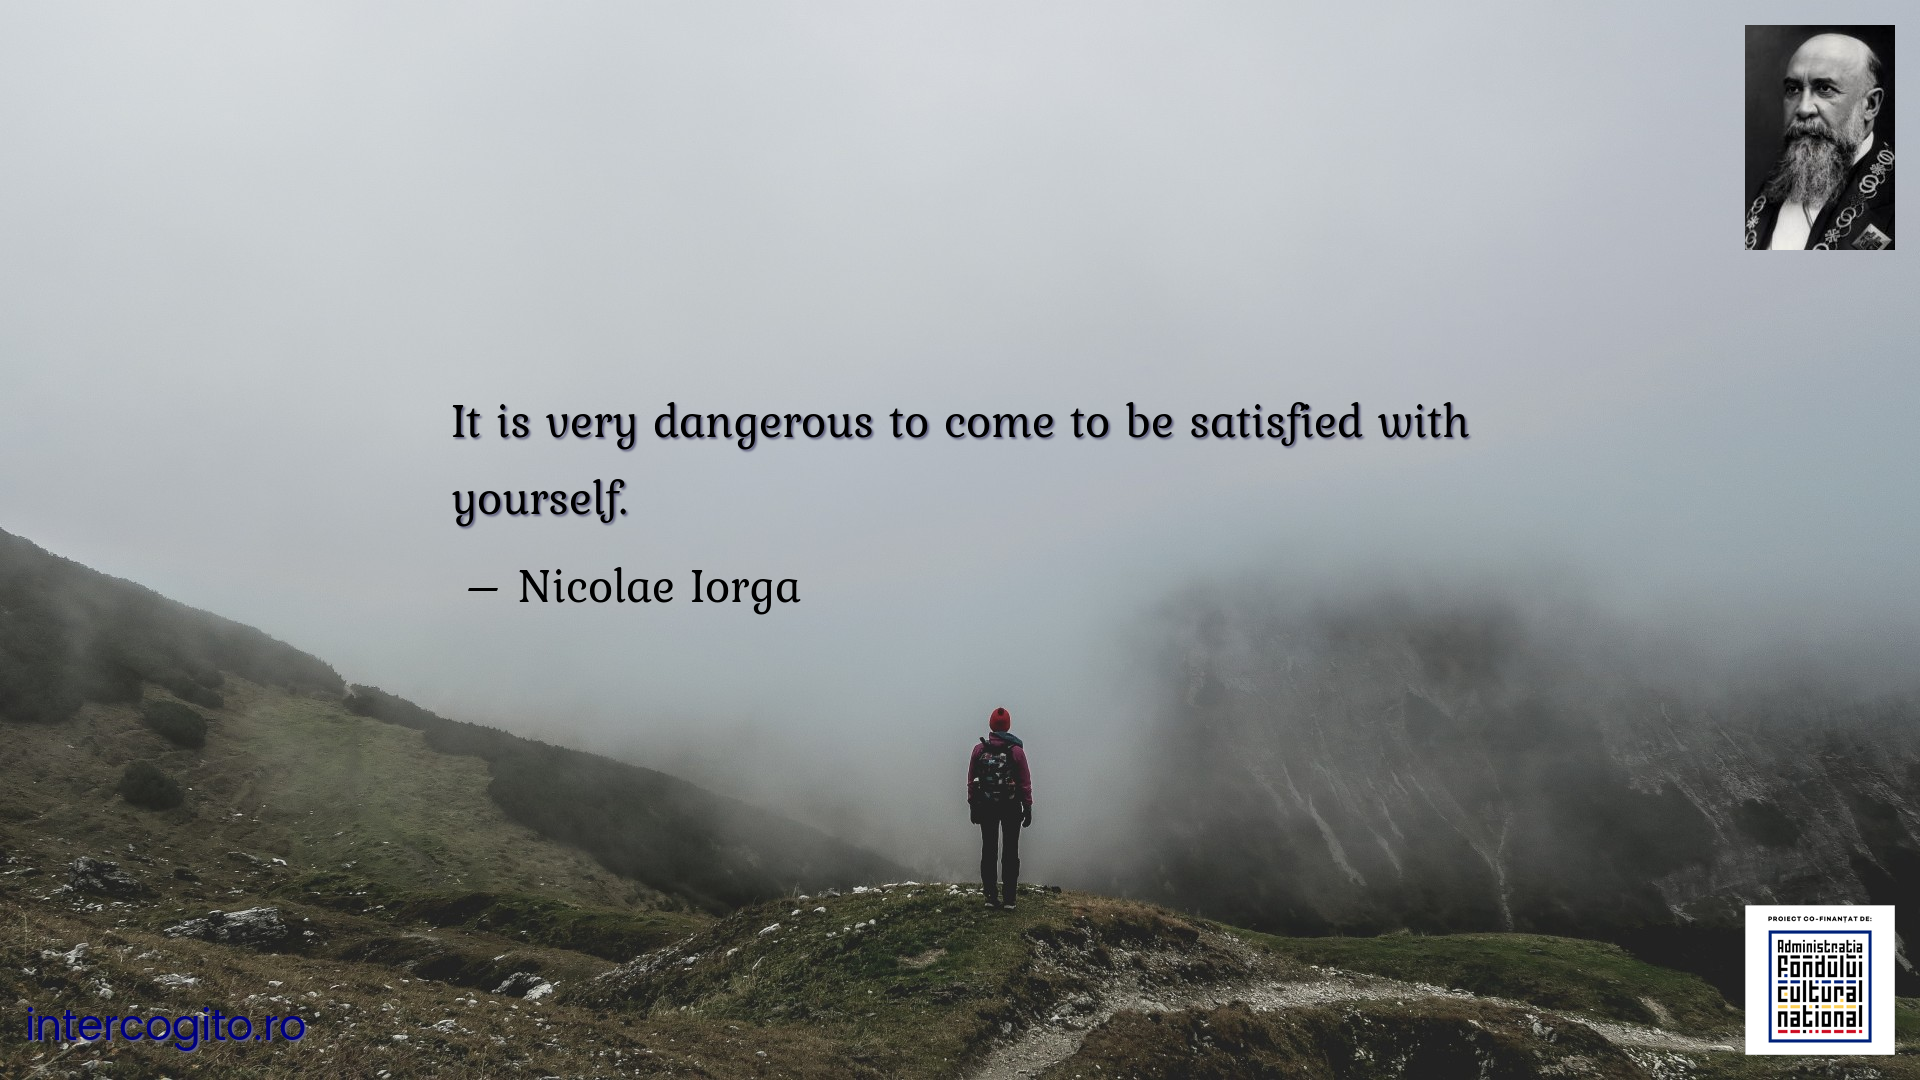 It is very dangerous to come to be satisfied with yourself.